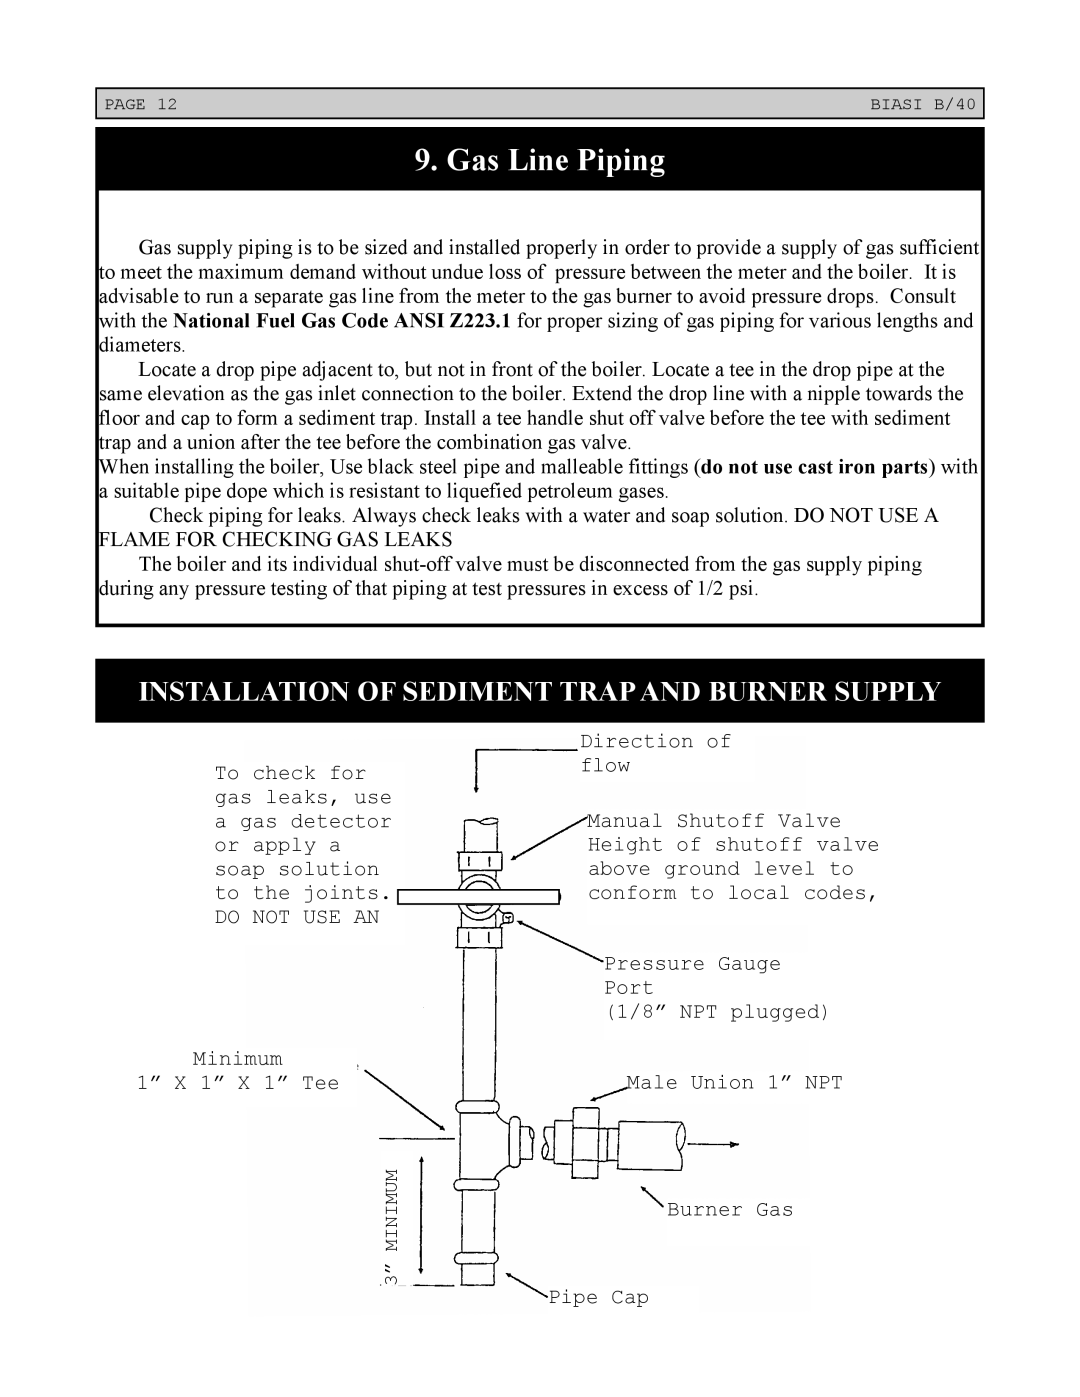 Linear Boiler installation instructions Gas Line Piping, Installation Of Sediment Trapand Burner Supply 